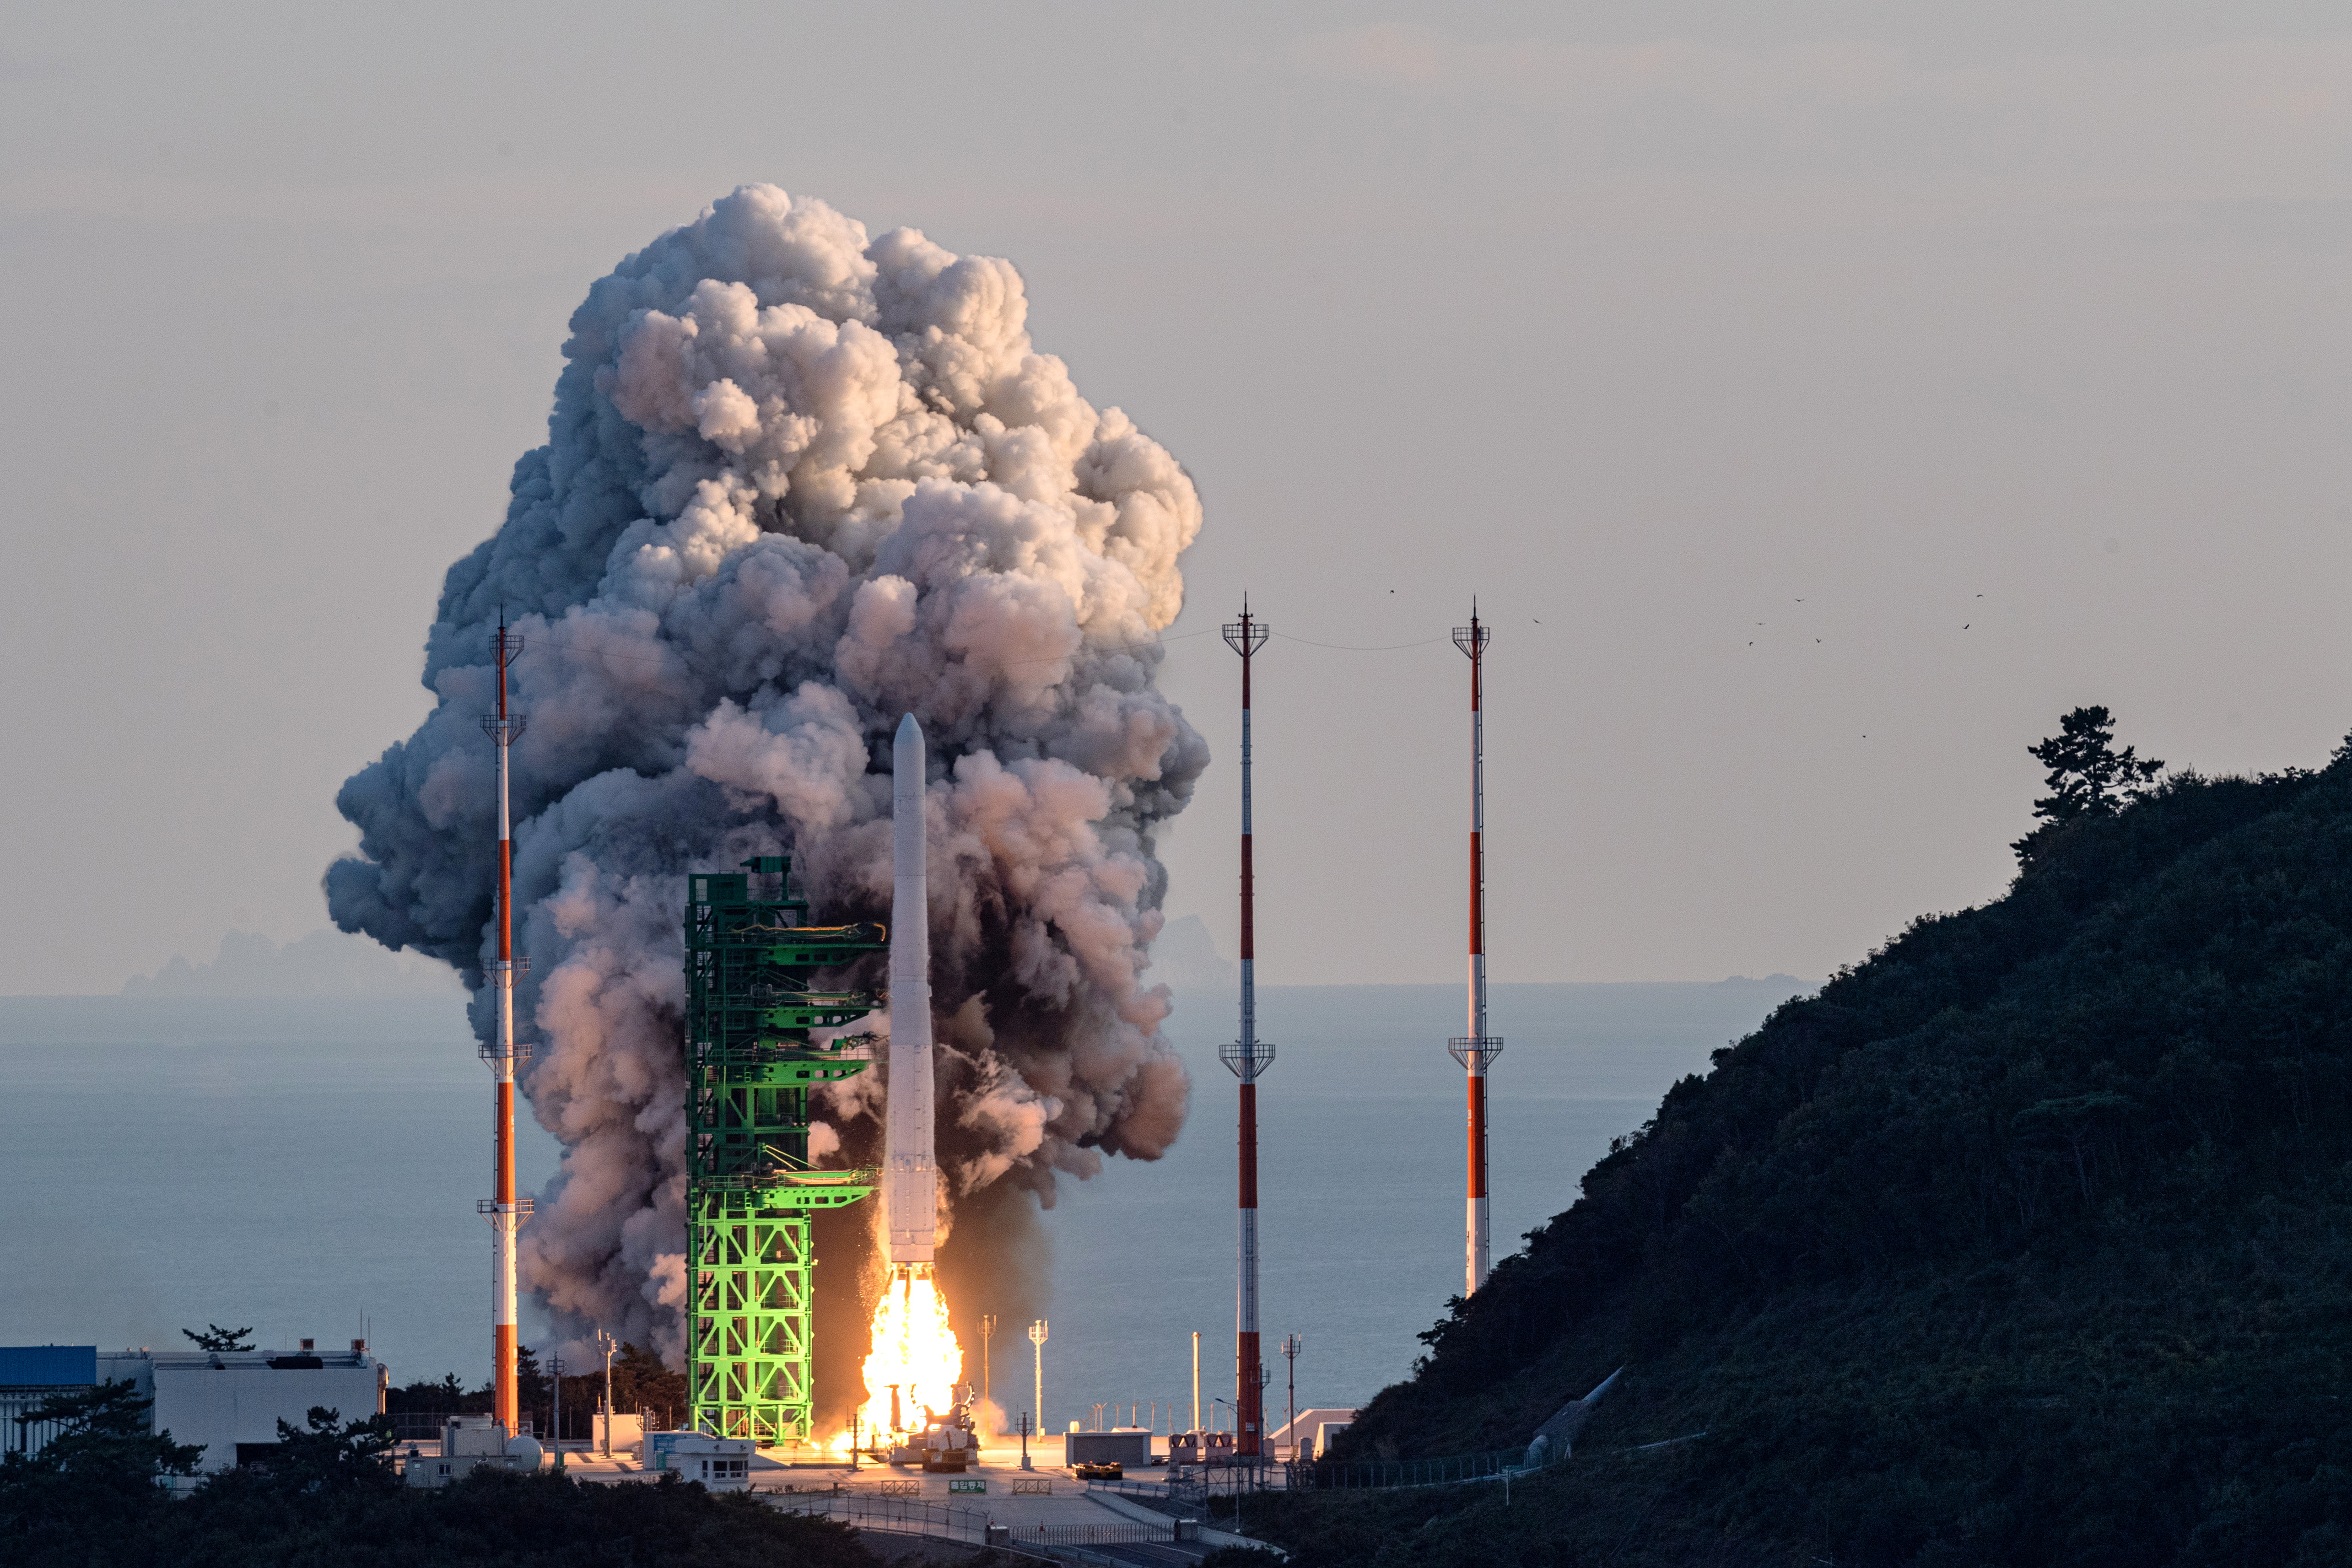 KSLV-II NURI rocket launches from its launch pad of the Naro Space Center in Goheung